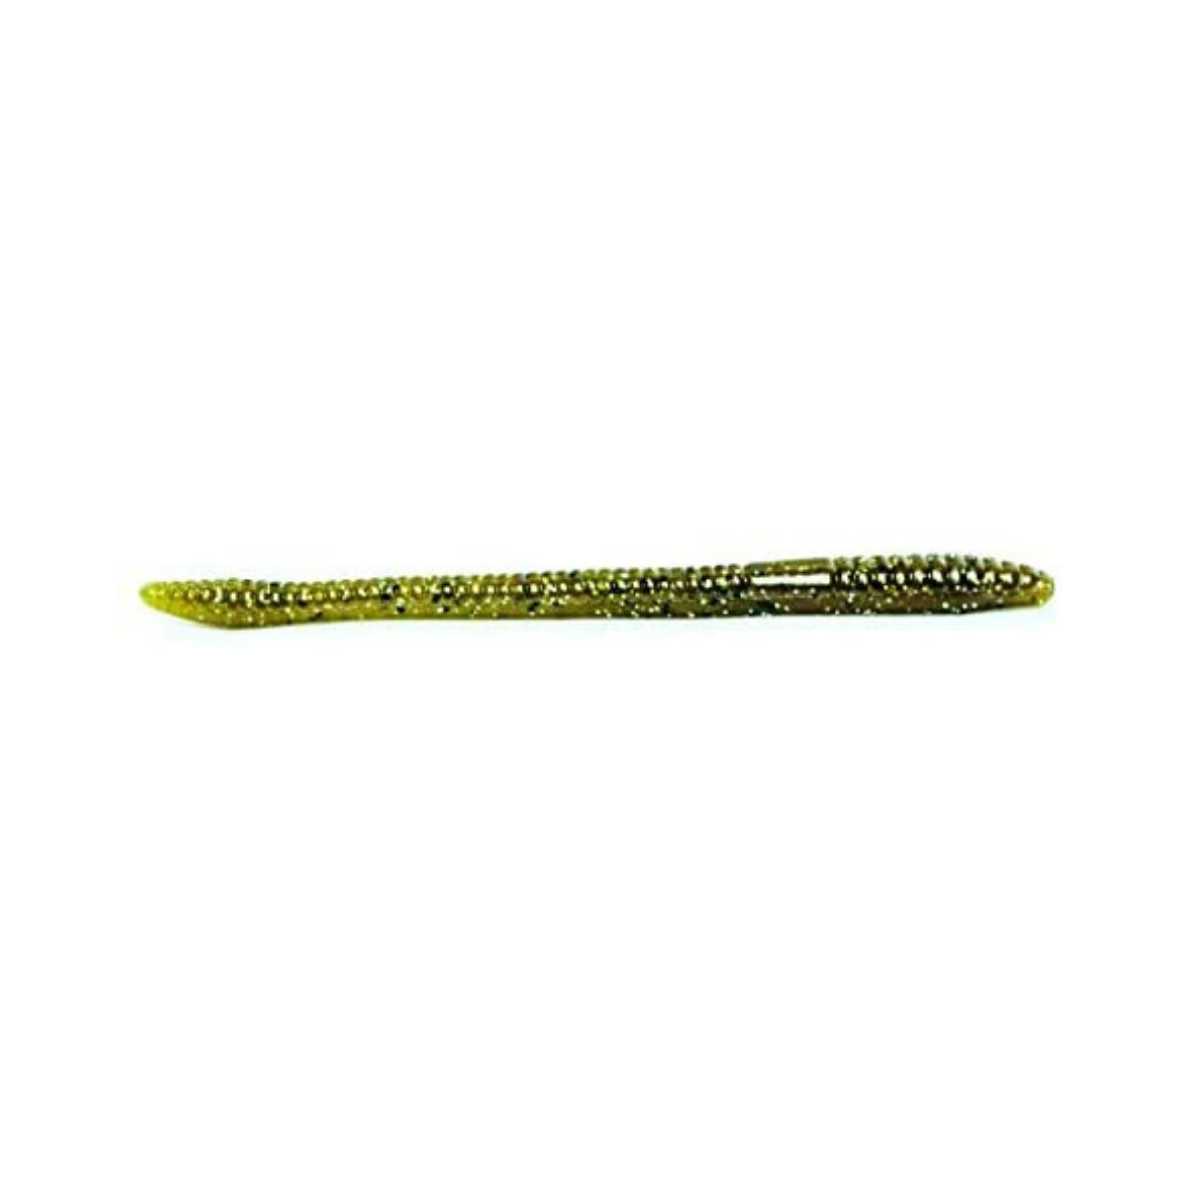 Pick Colors 4.5" 20pk Zoom Finesse Worm